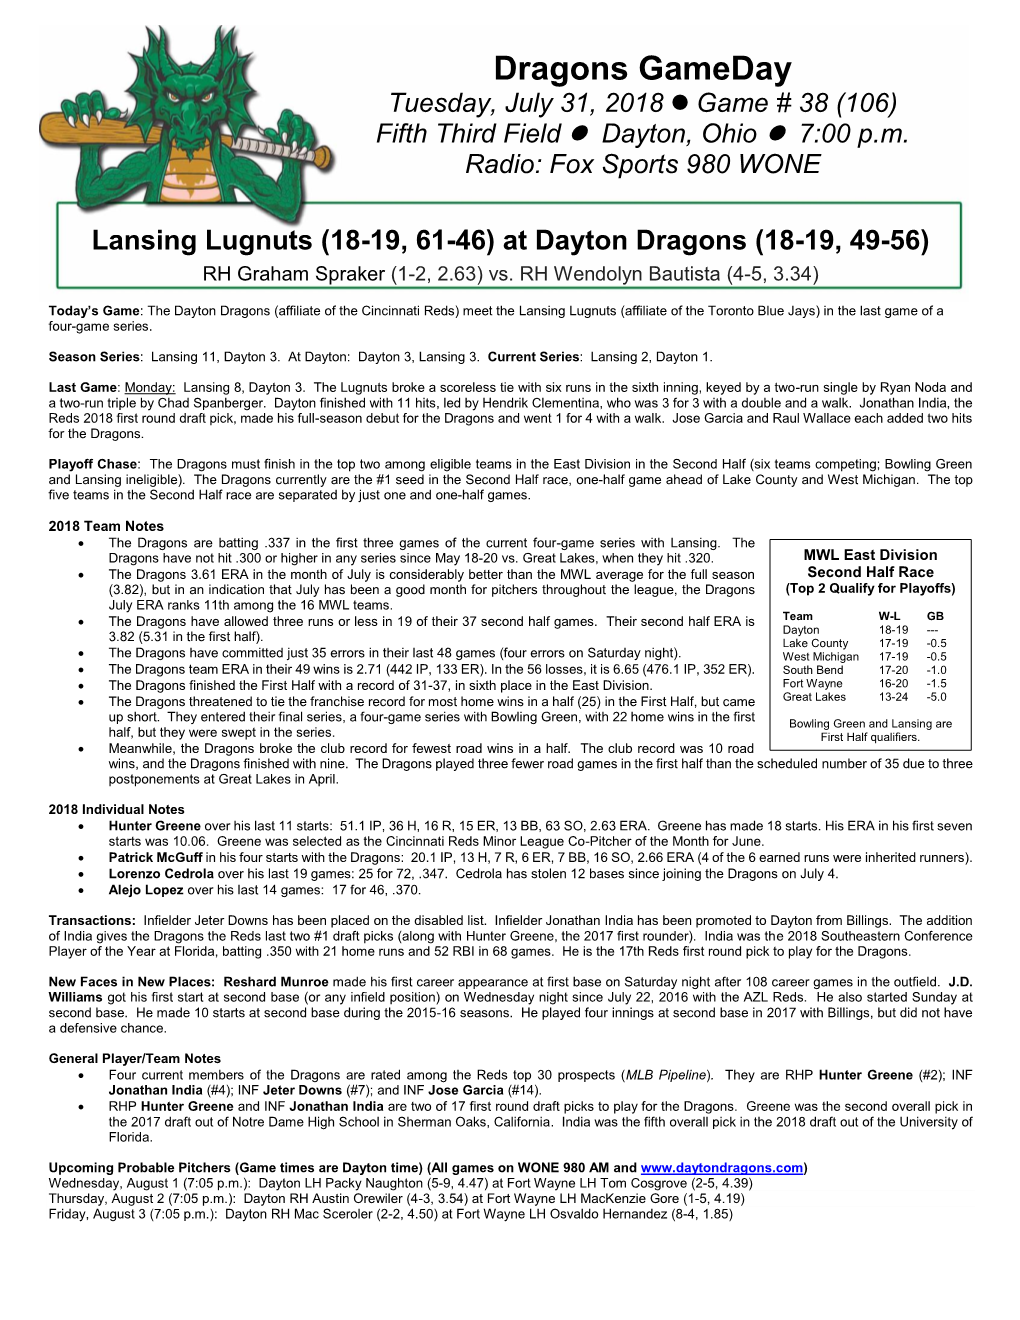 Dragons Gameday Tuesday, July 31, 2018  Game # 38 (106) Fifth Third Field  Dayton, Ohio  7:00 P.M